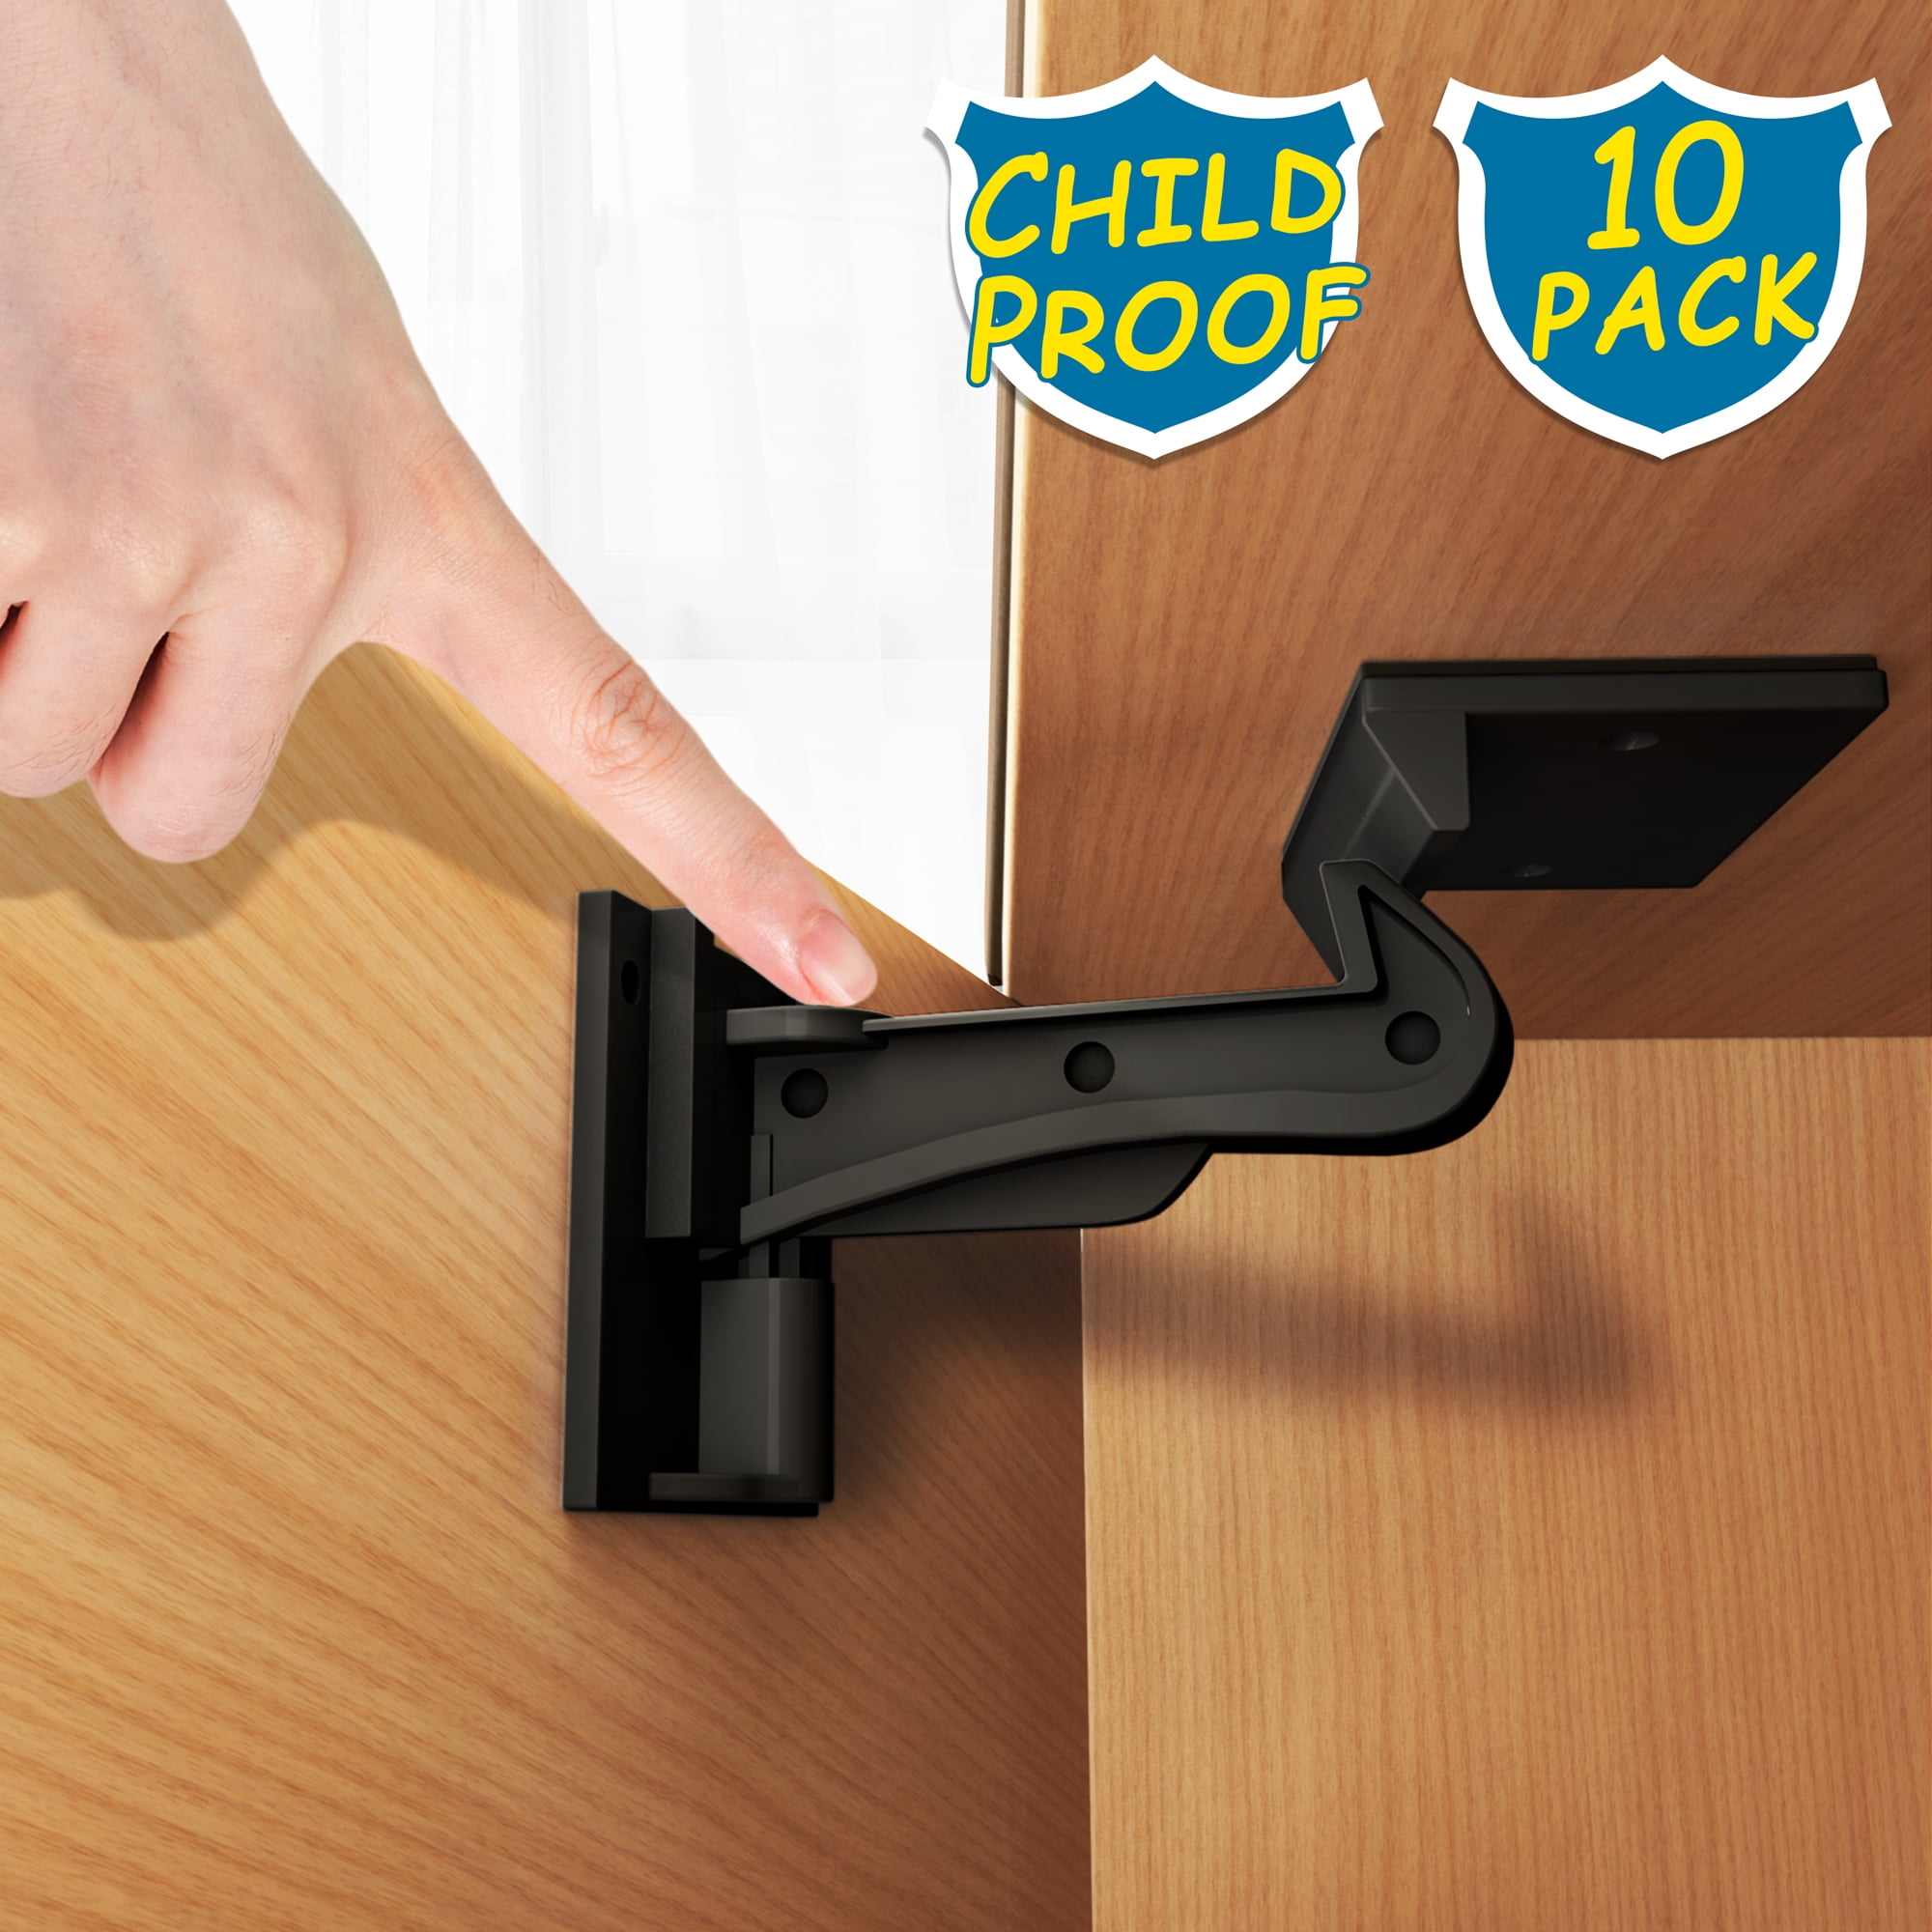 Cabinet Locks Child Safety Latches - Baby Proofing Cabinets & Drawers Locks  - Child Proof Your Home - No Drilling & No Tools Required! (8 Pack) 8 Count  (Pack of 1)